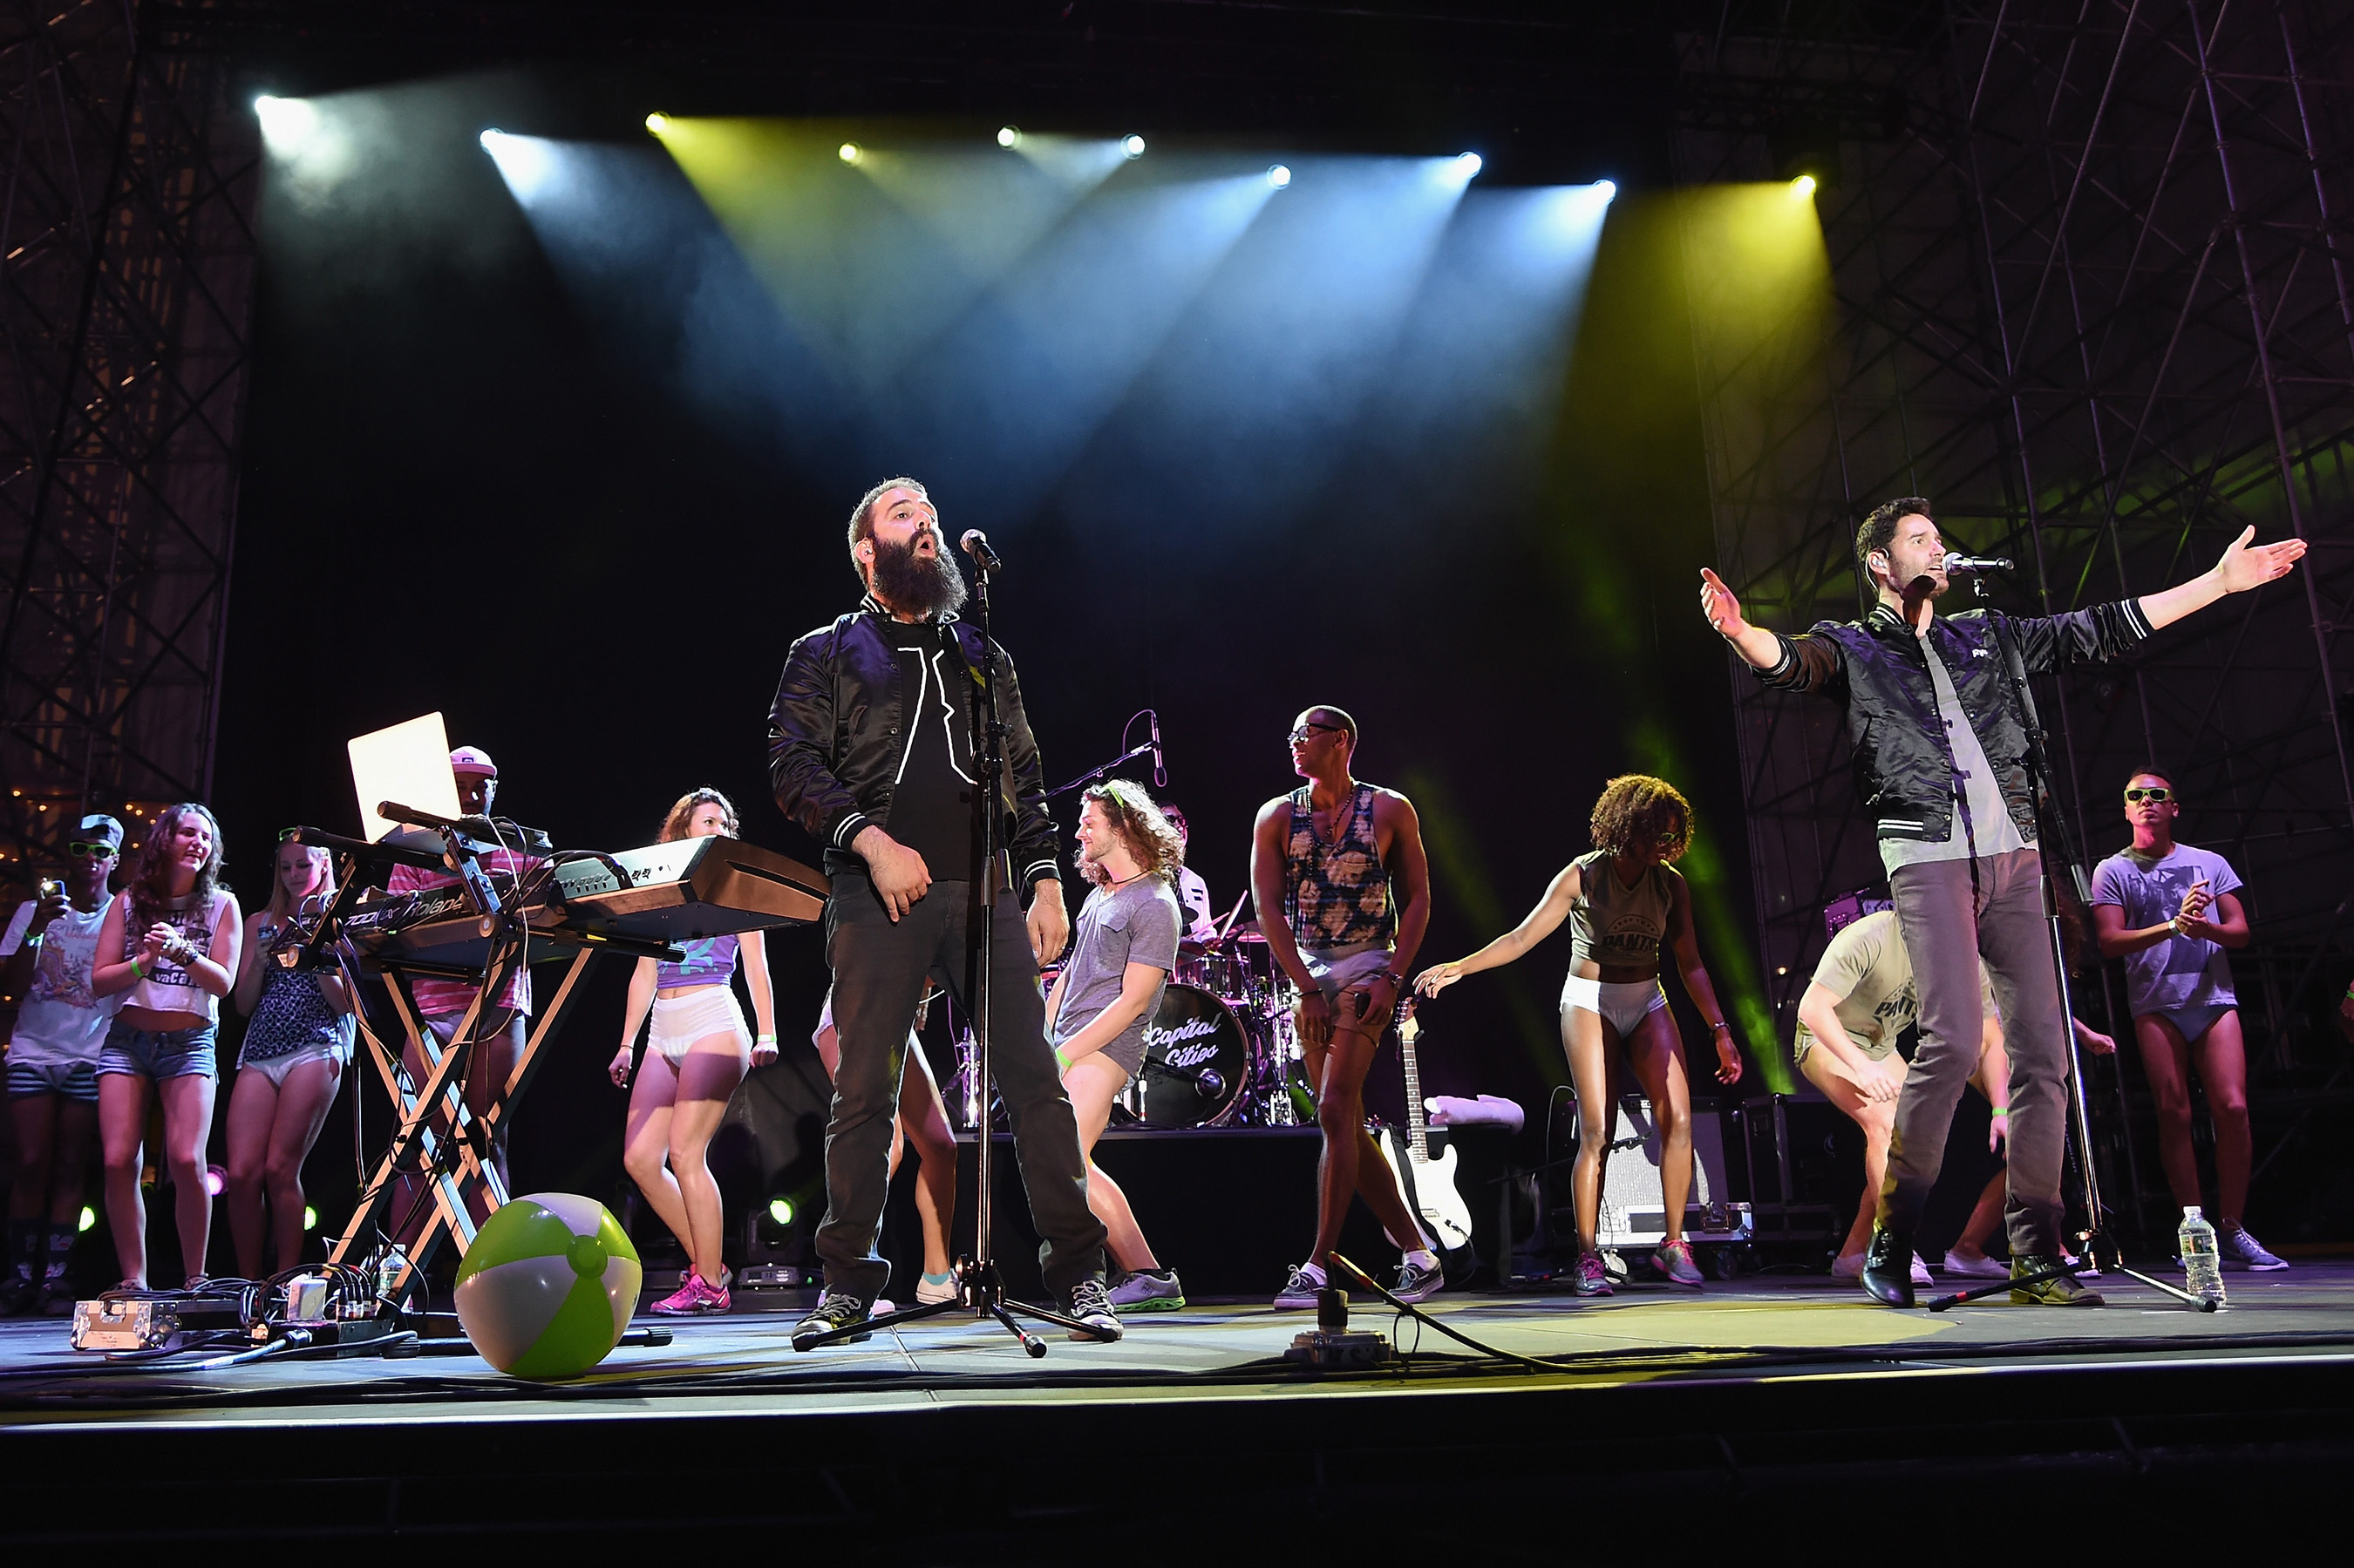 Capital Cities performs as dancers wear Depend Underwear at the Drop Your Pants and Dance for Underwareness charity event at Pier 97 in New York City.